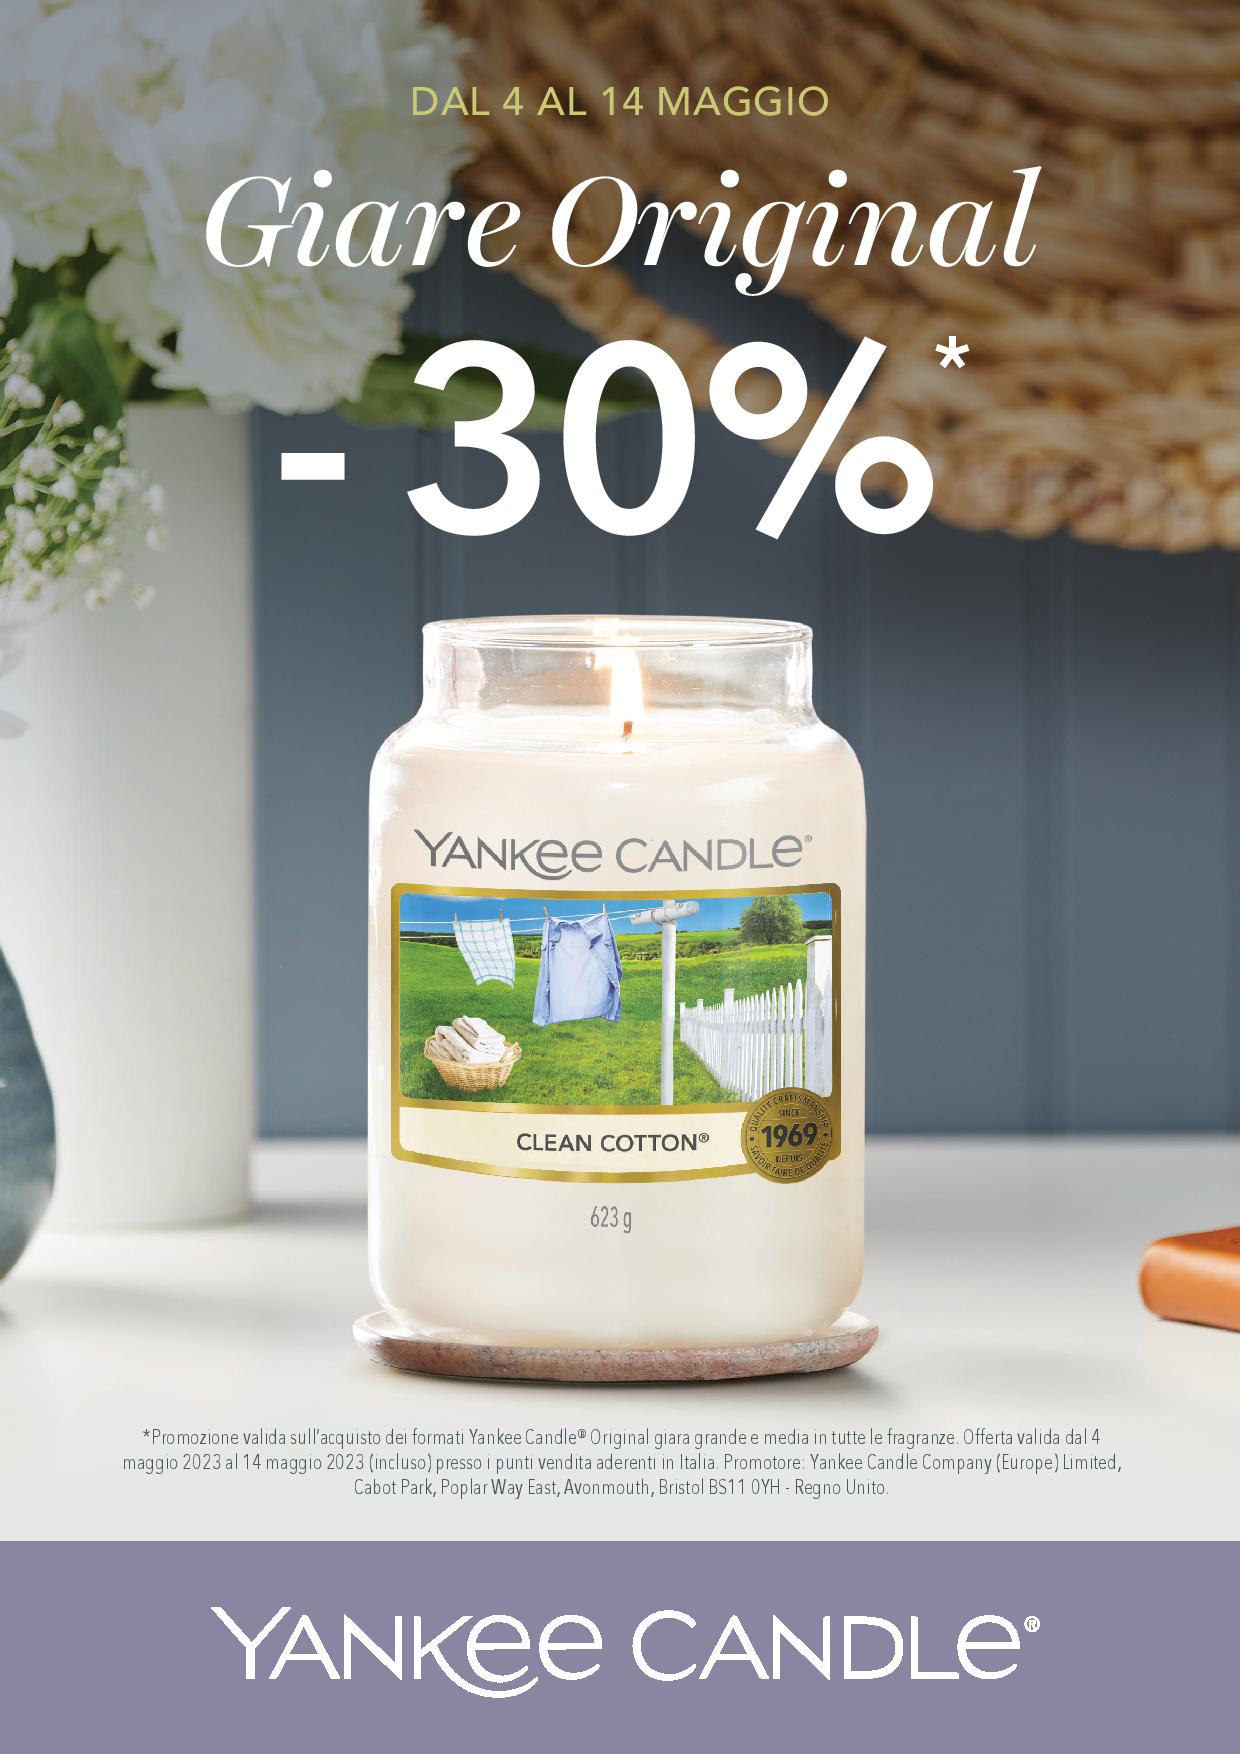 Yankee Candle Winter Event